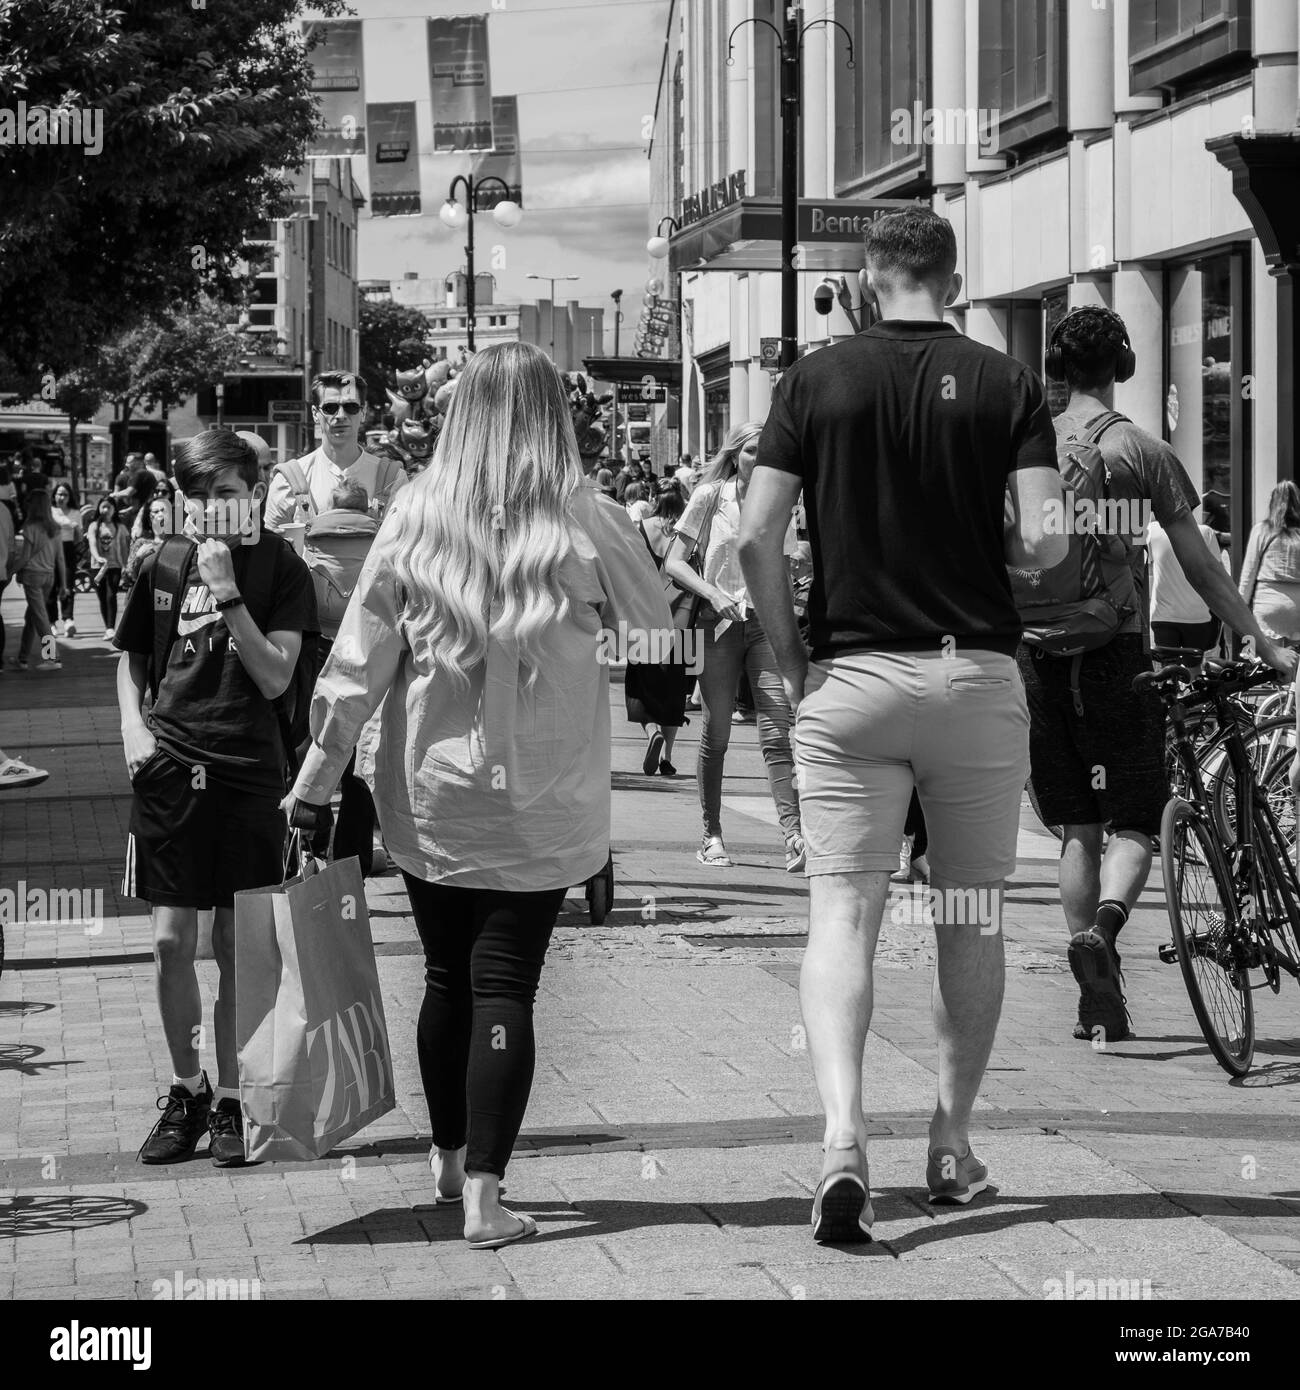 Kingston Surrey London, June 2021, People Walking Along A High Street On A Busy Sunny Day In Black and White Stock Photo